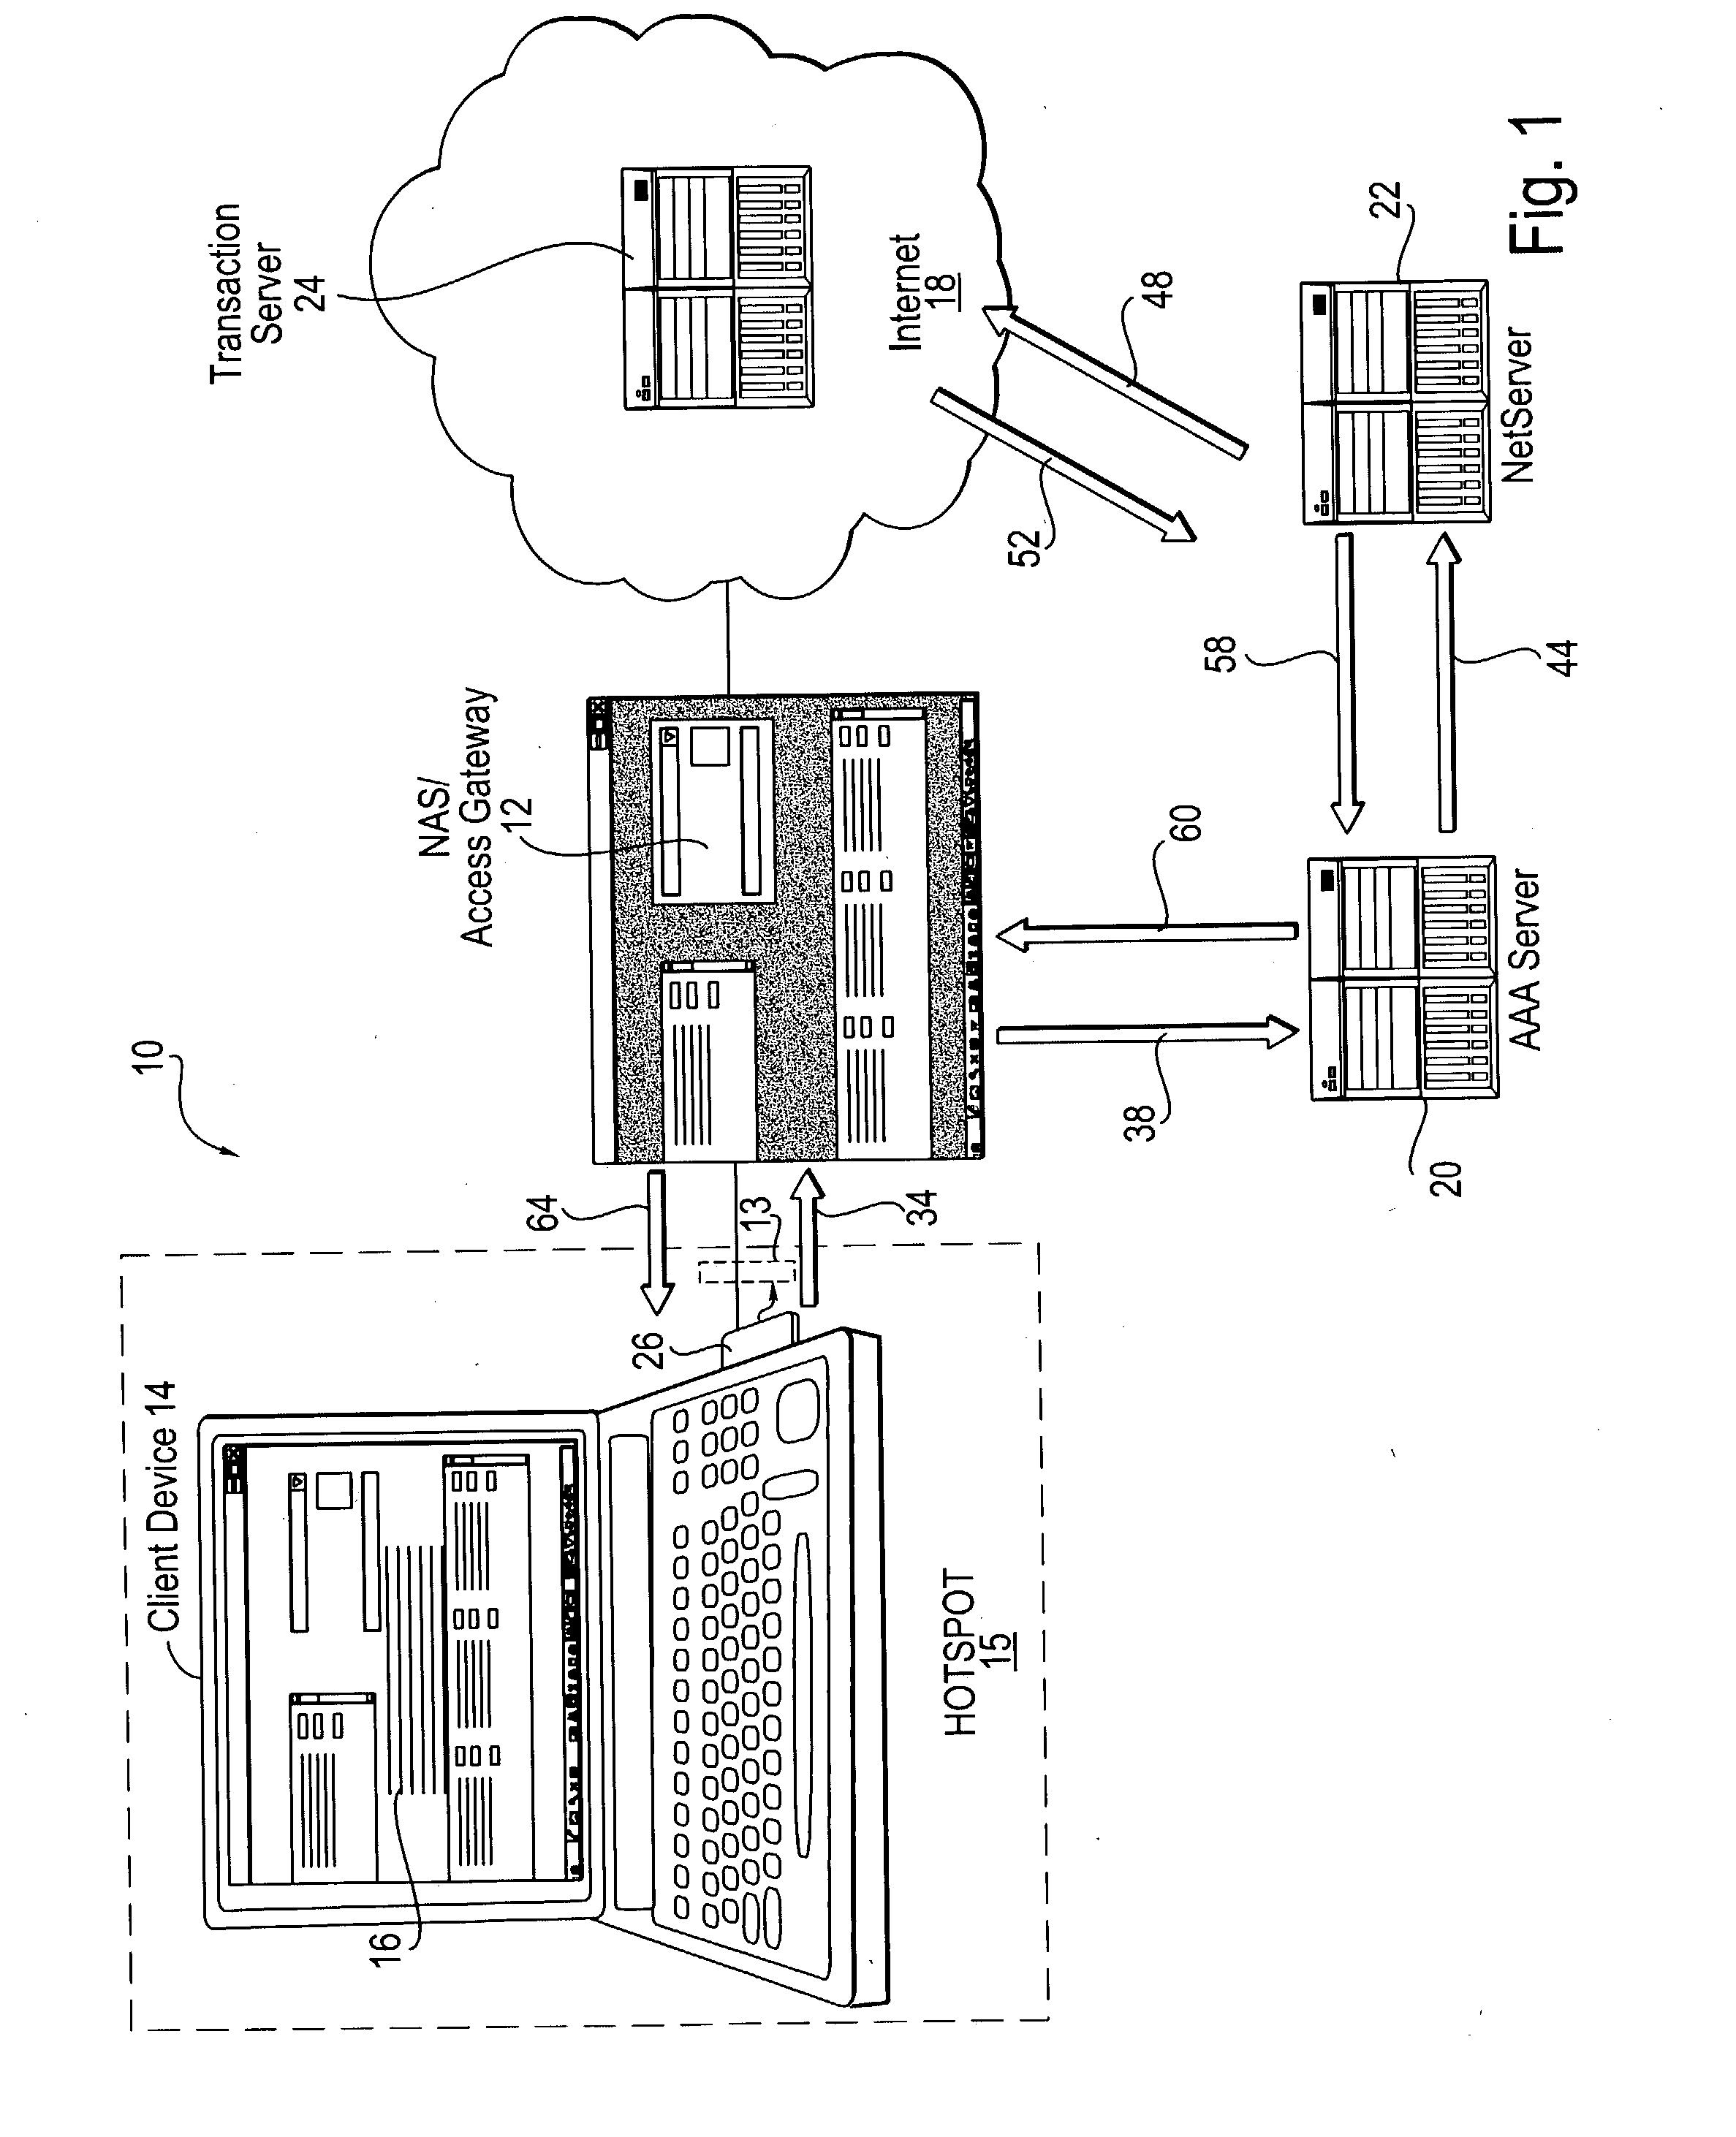 Method and system of providing access point data associated with a network access point